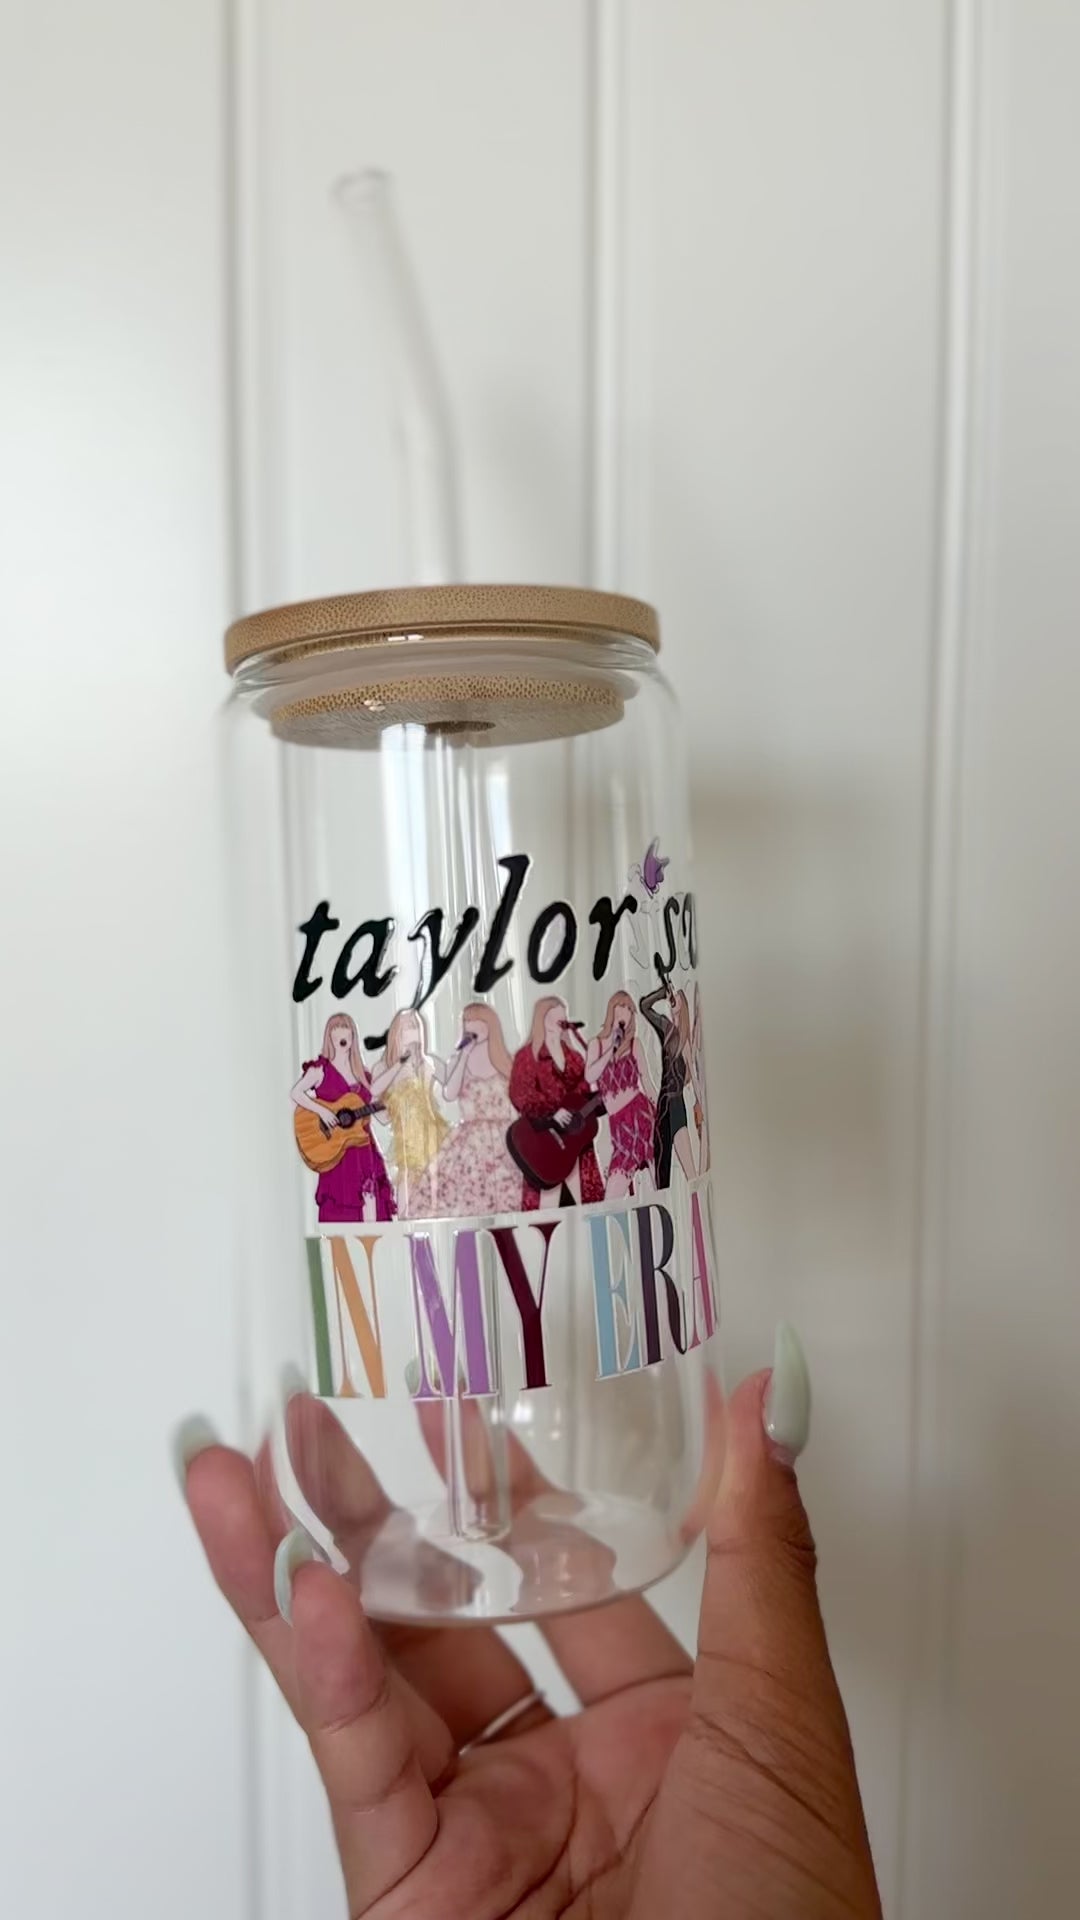 Taylor Swift Eras Glass Can Cup